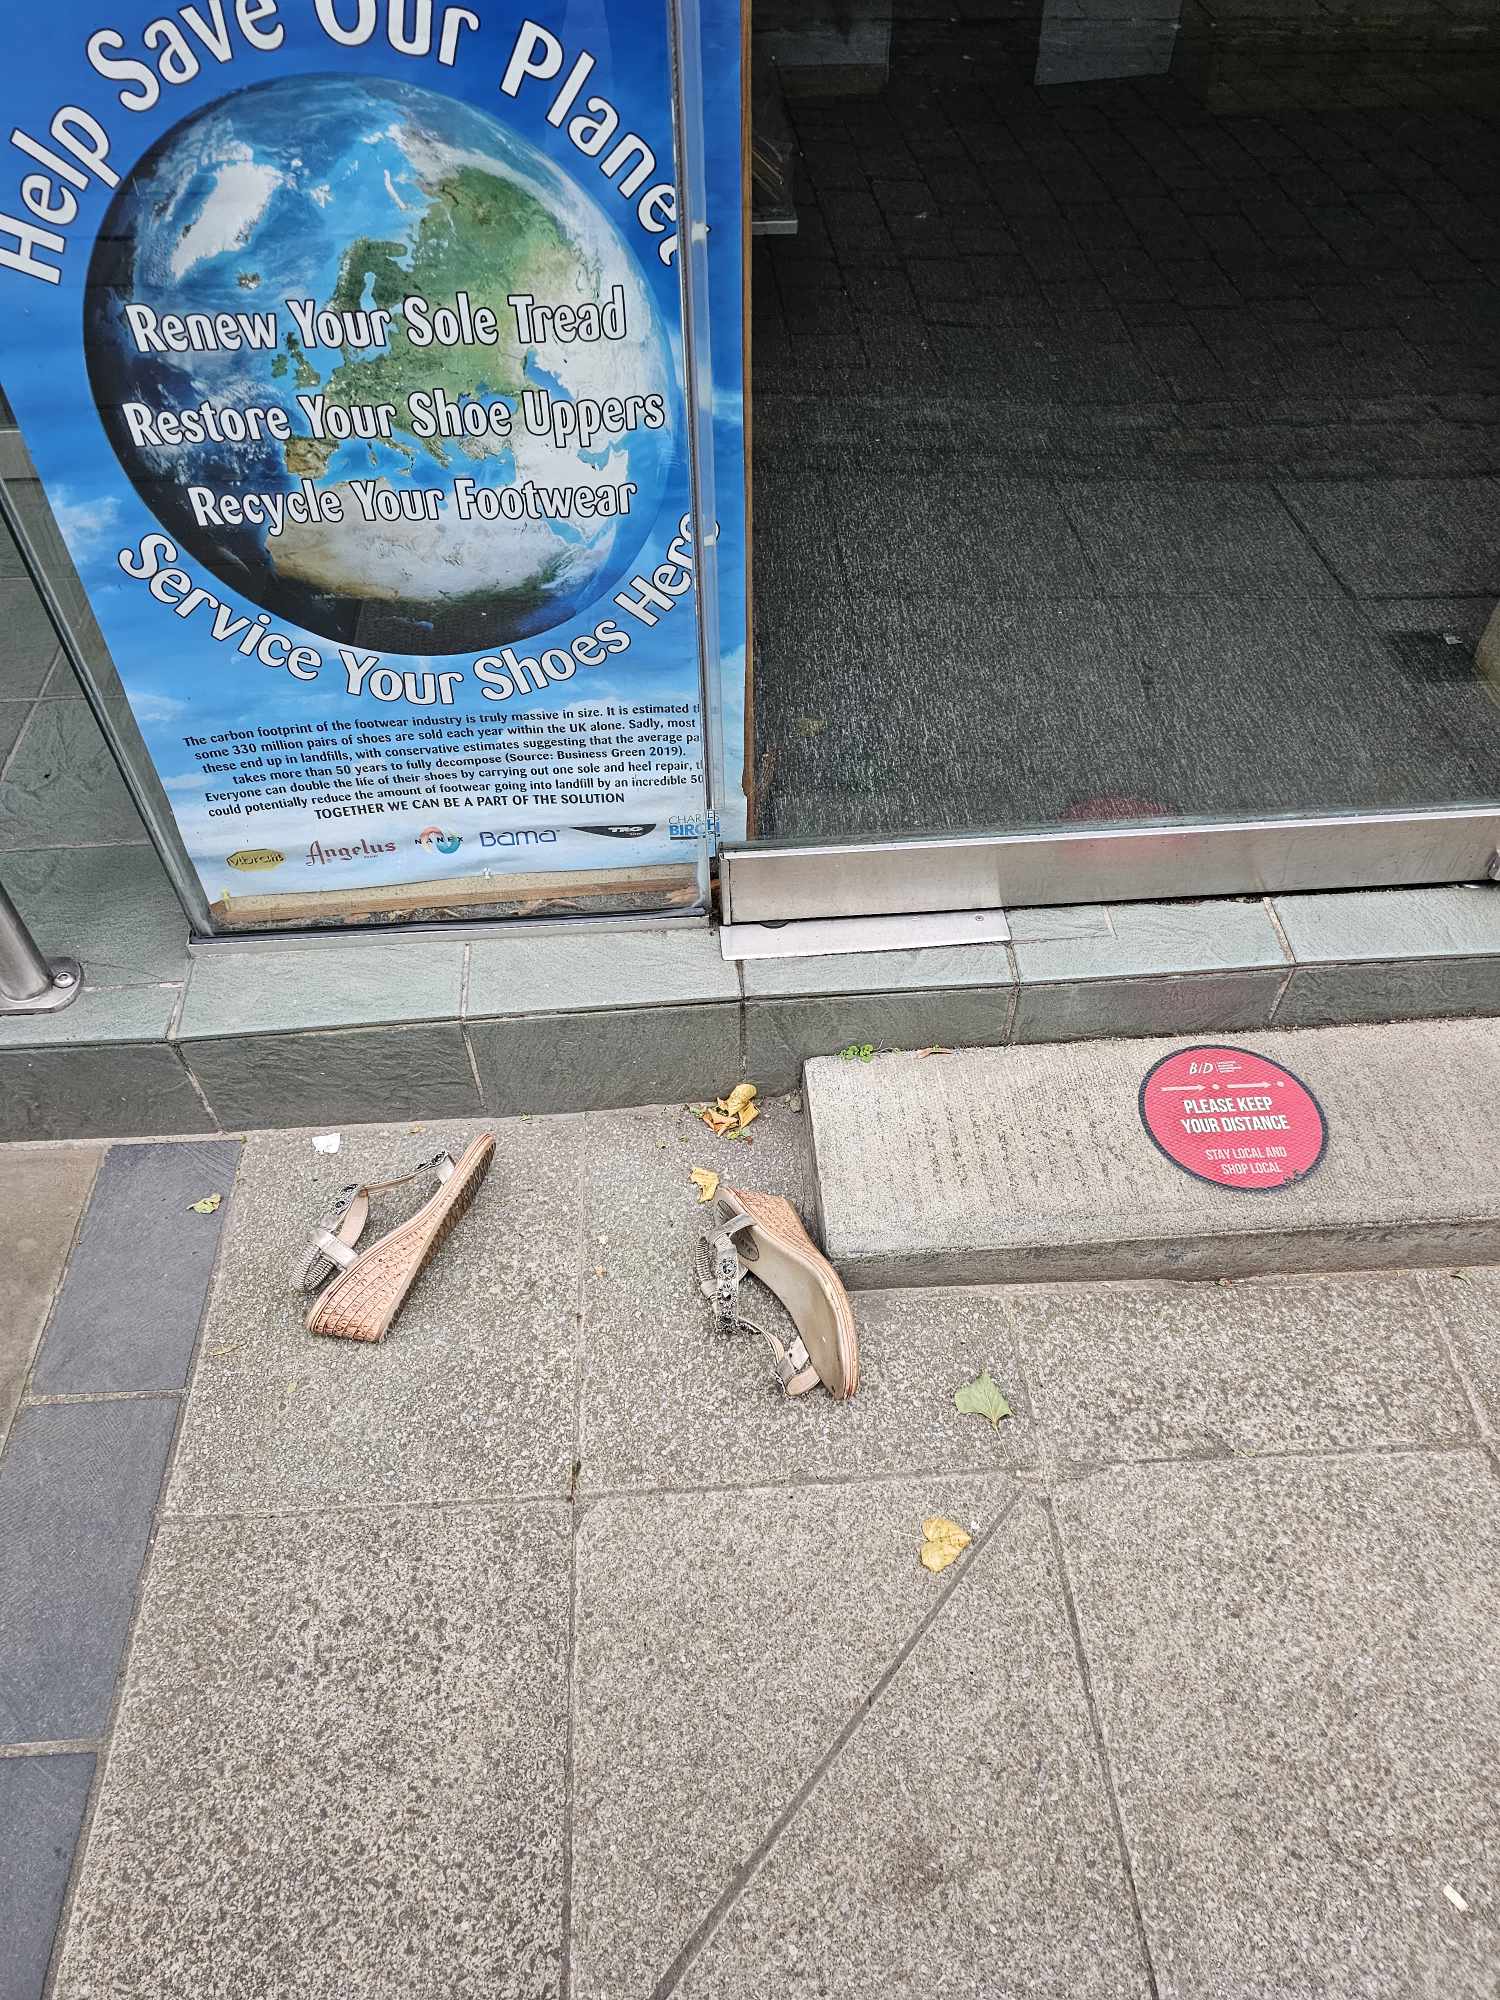 The shoes, a pair of tan wedges, that had been left outside Mr Corke's shop 